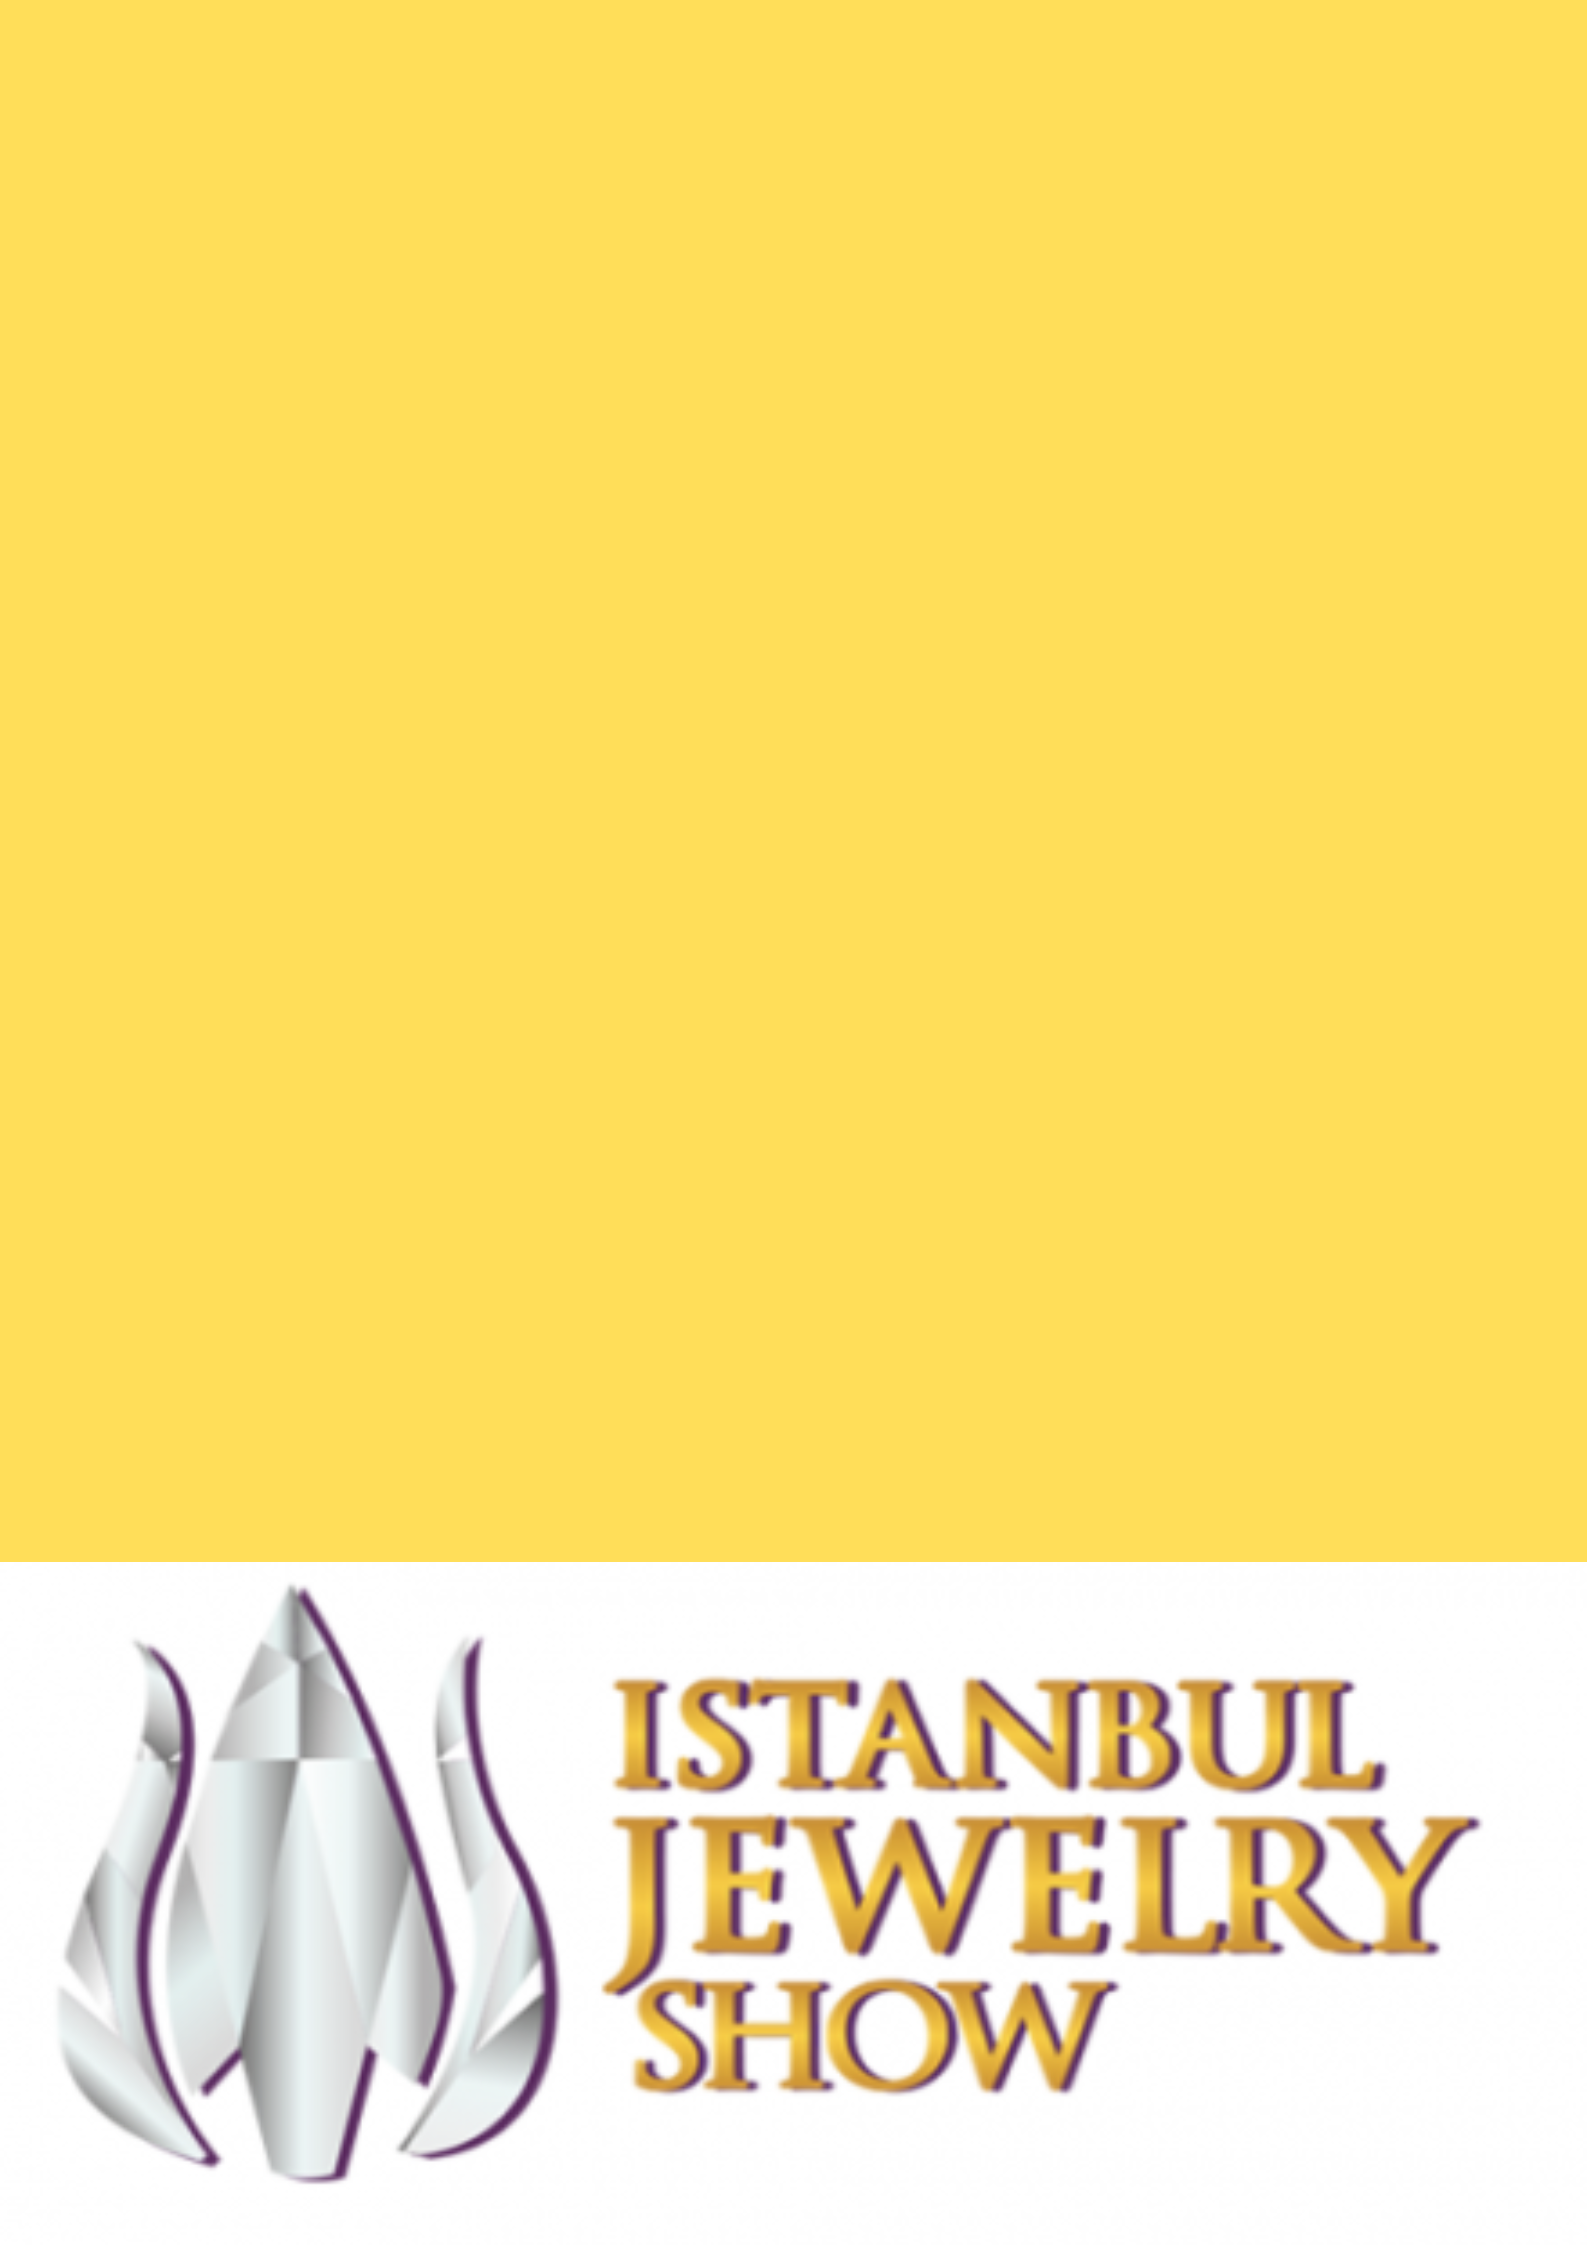 Istambul Jewellery Show has announced their new dates!